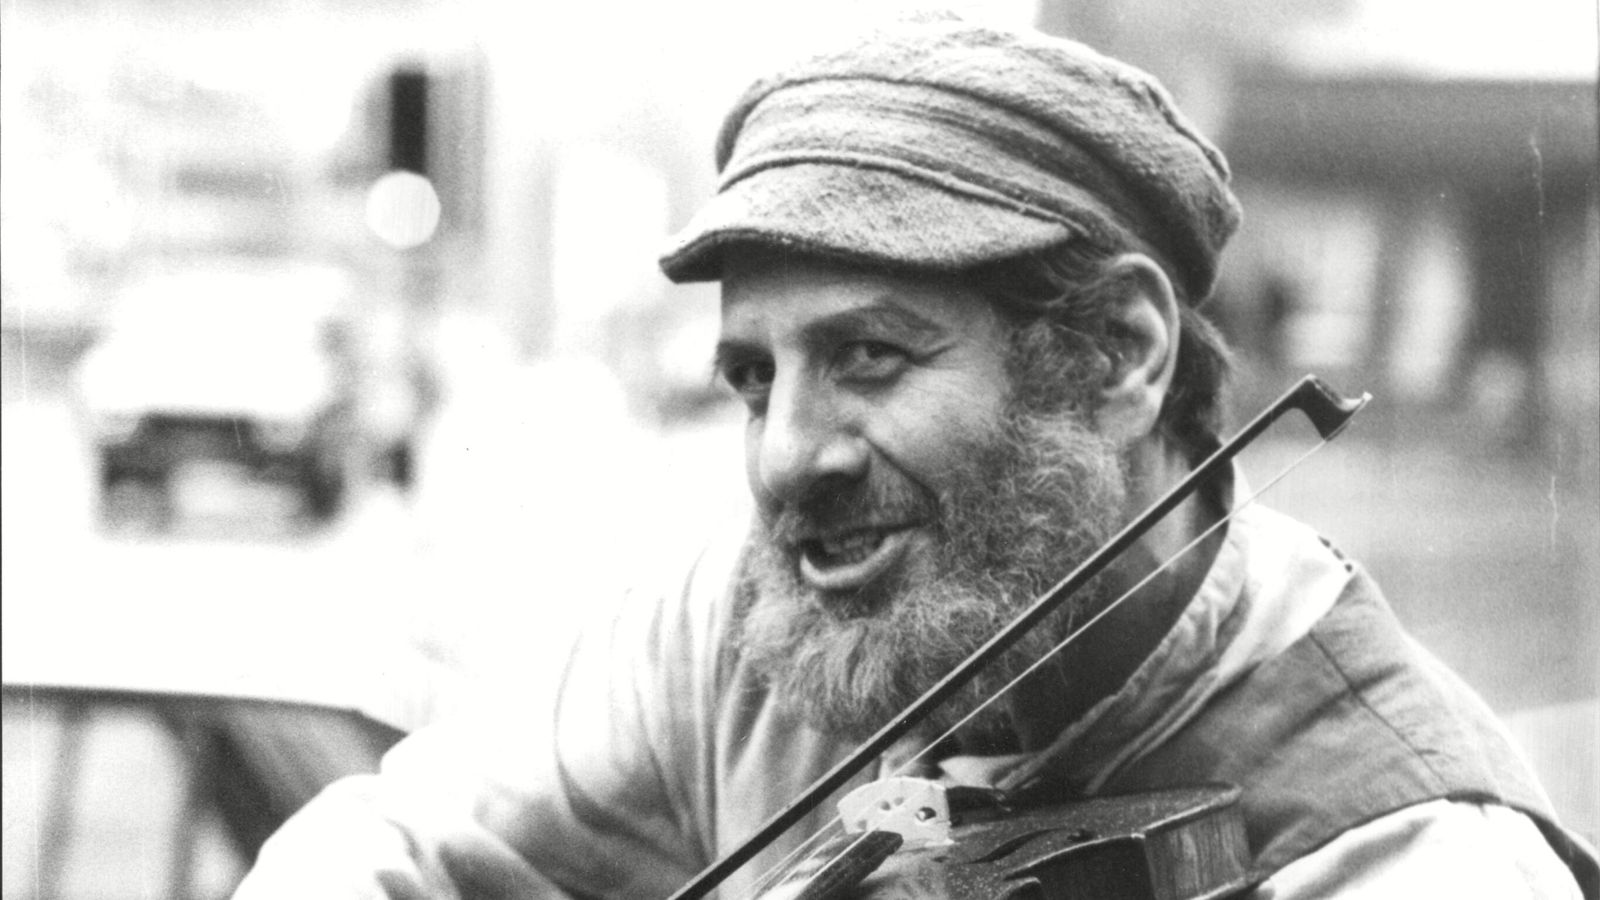 Fiddler on the Roof actor Chaim Topol dies aged 87